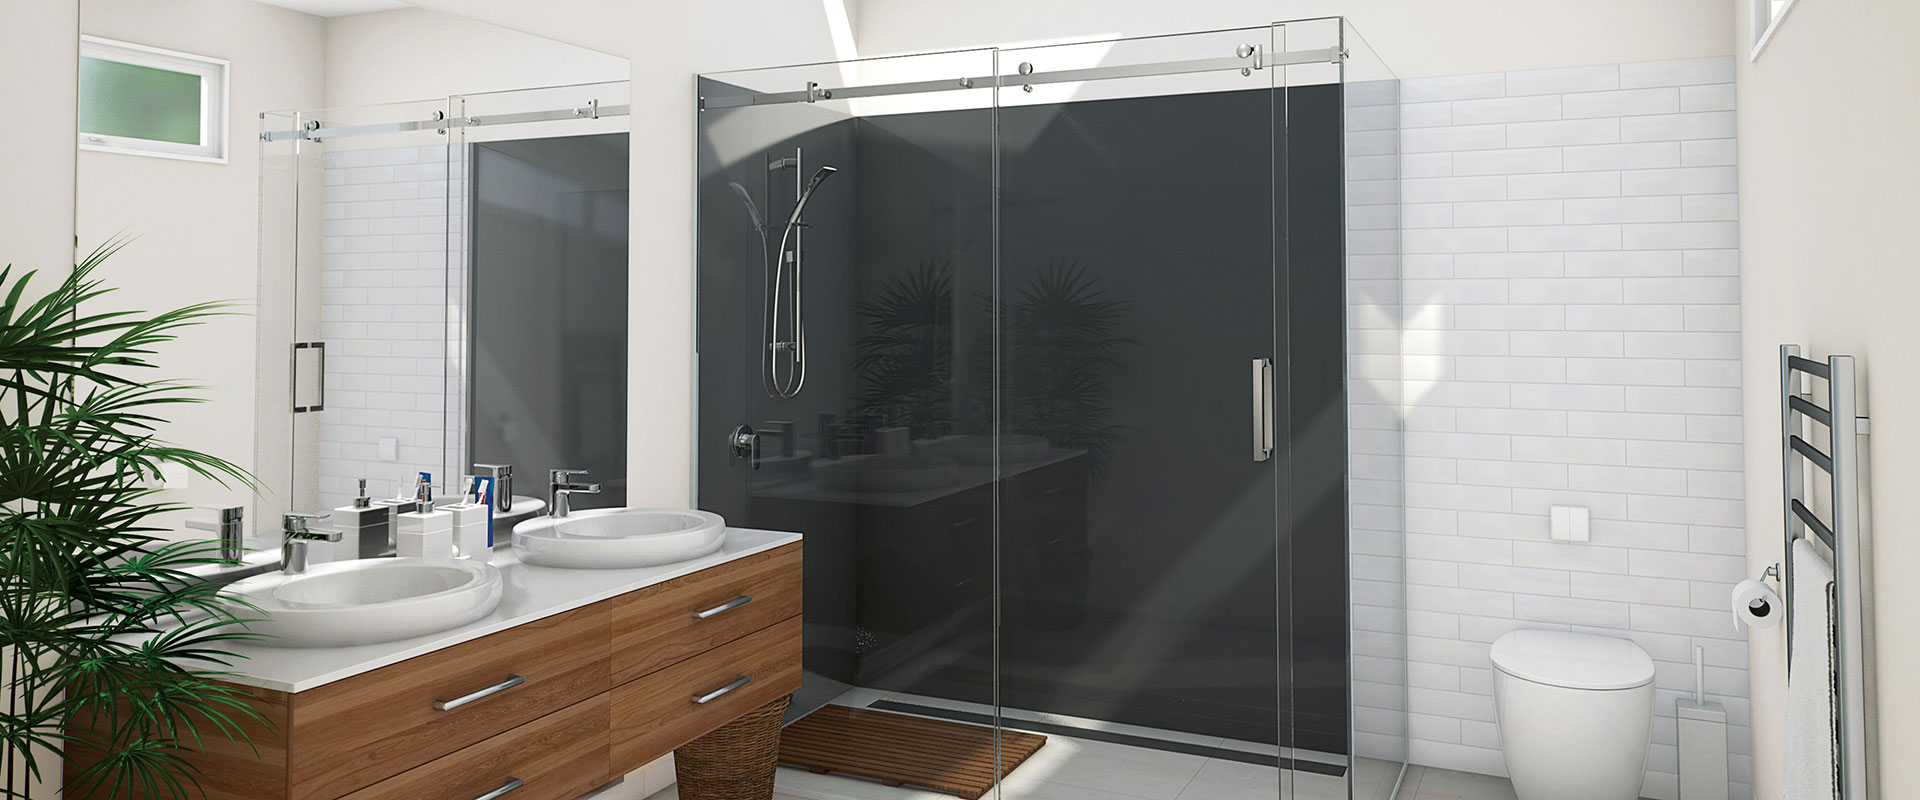 A bright bathroom with a double sized glass showeragainst one wall